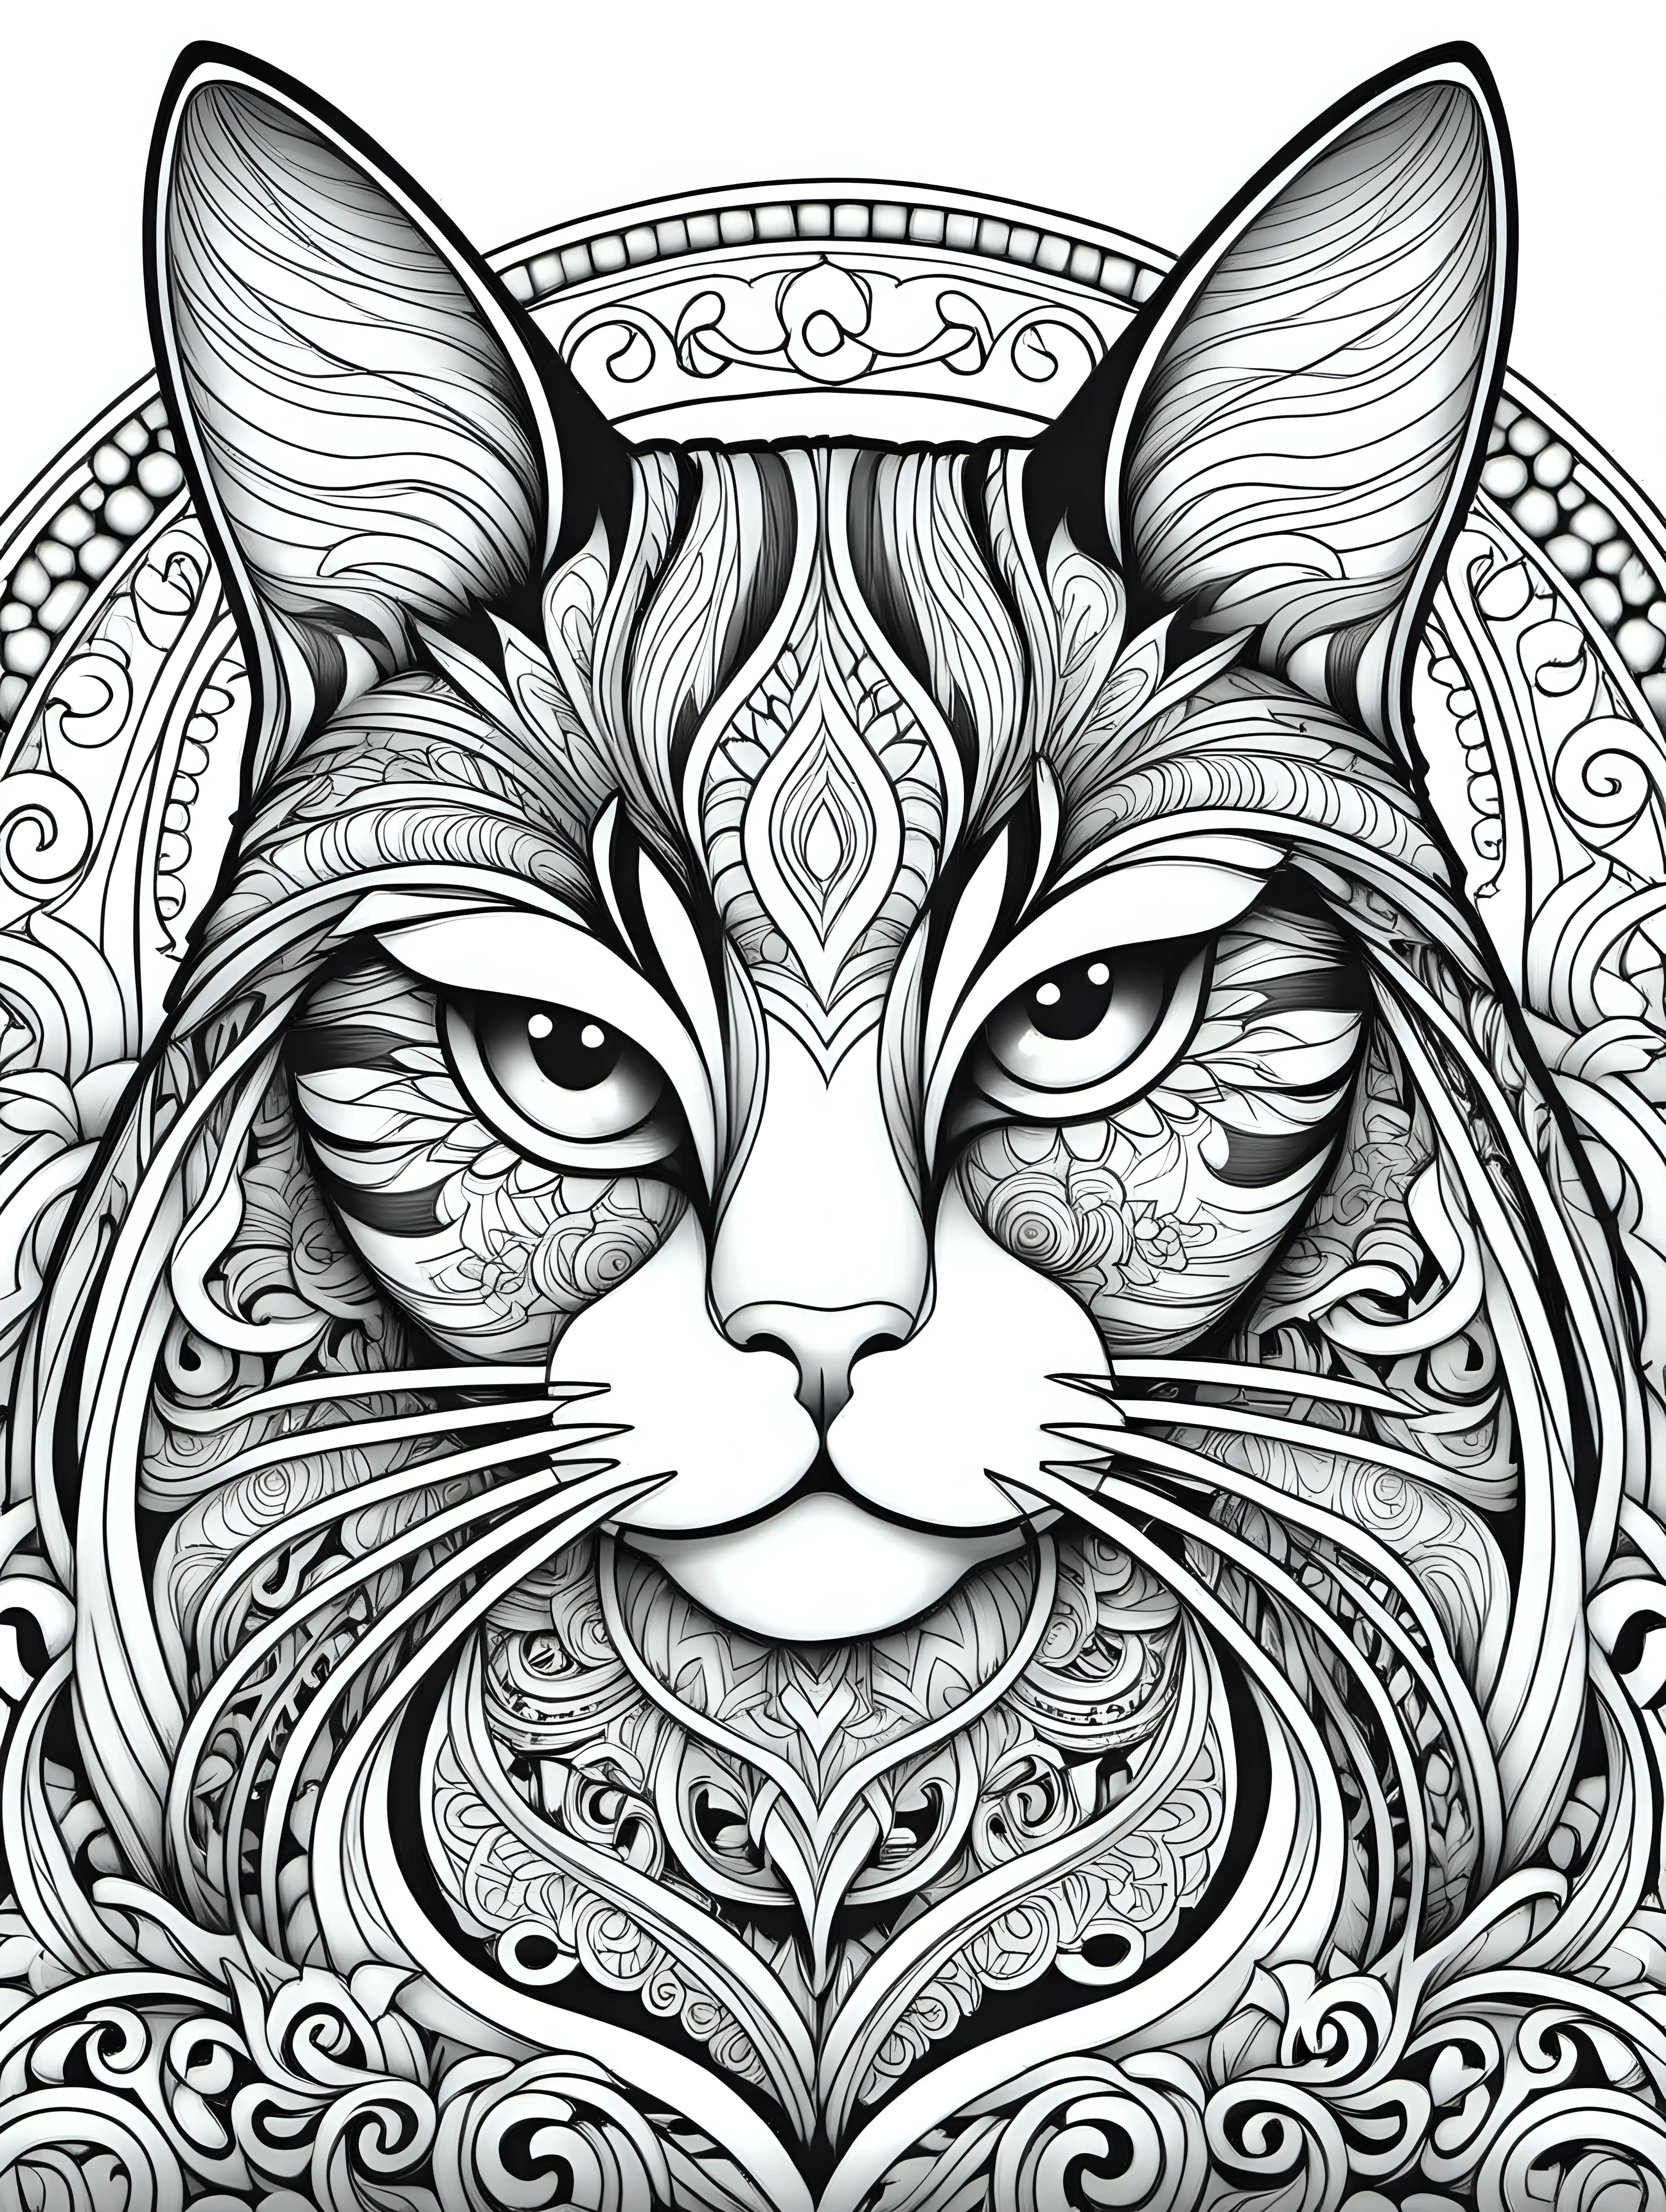 create a logo for an adult coloring book entitled "Worldly Cats: Adult Coloring Book Pages" which features intricate and sophisticated black and white drawings of domestic cats from different countries.
